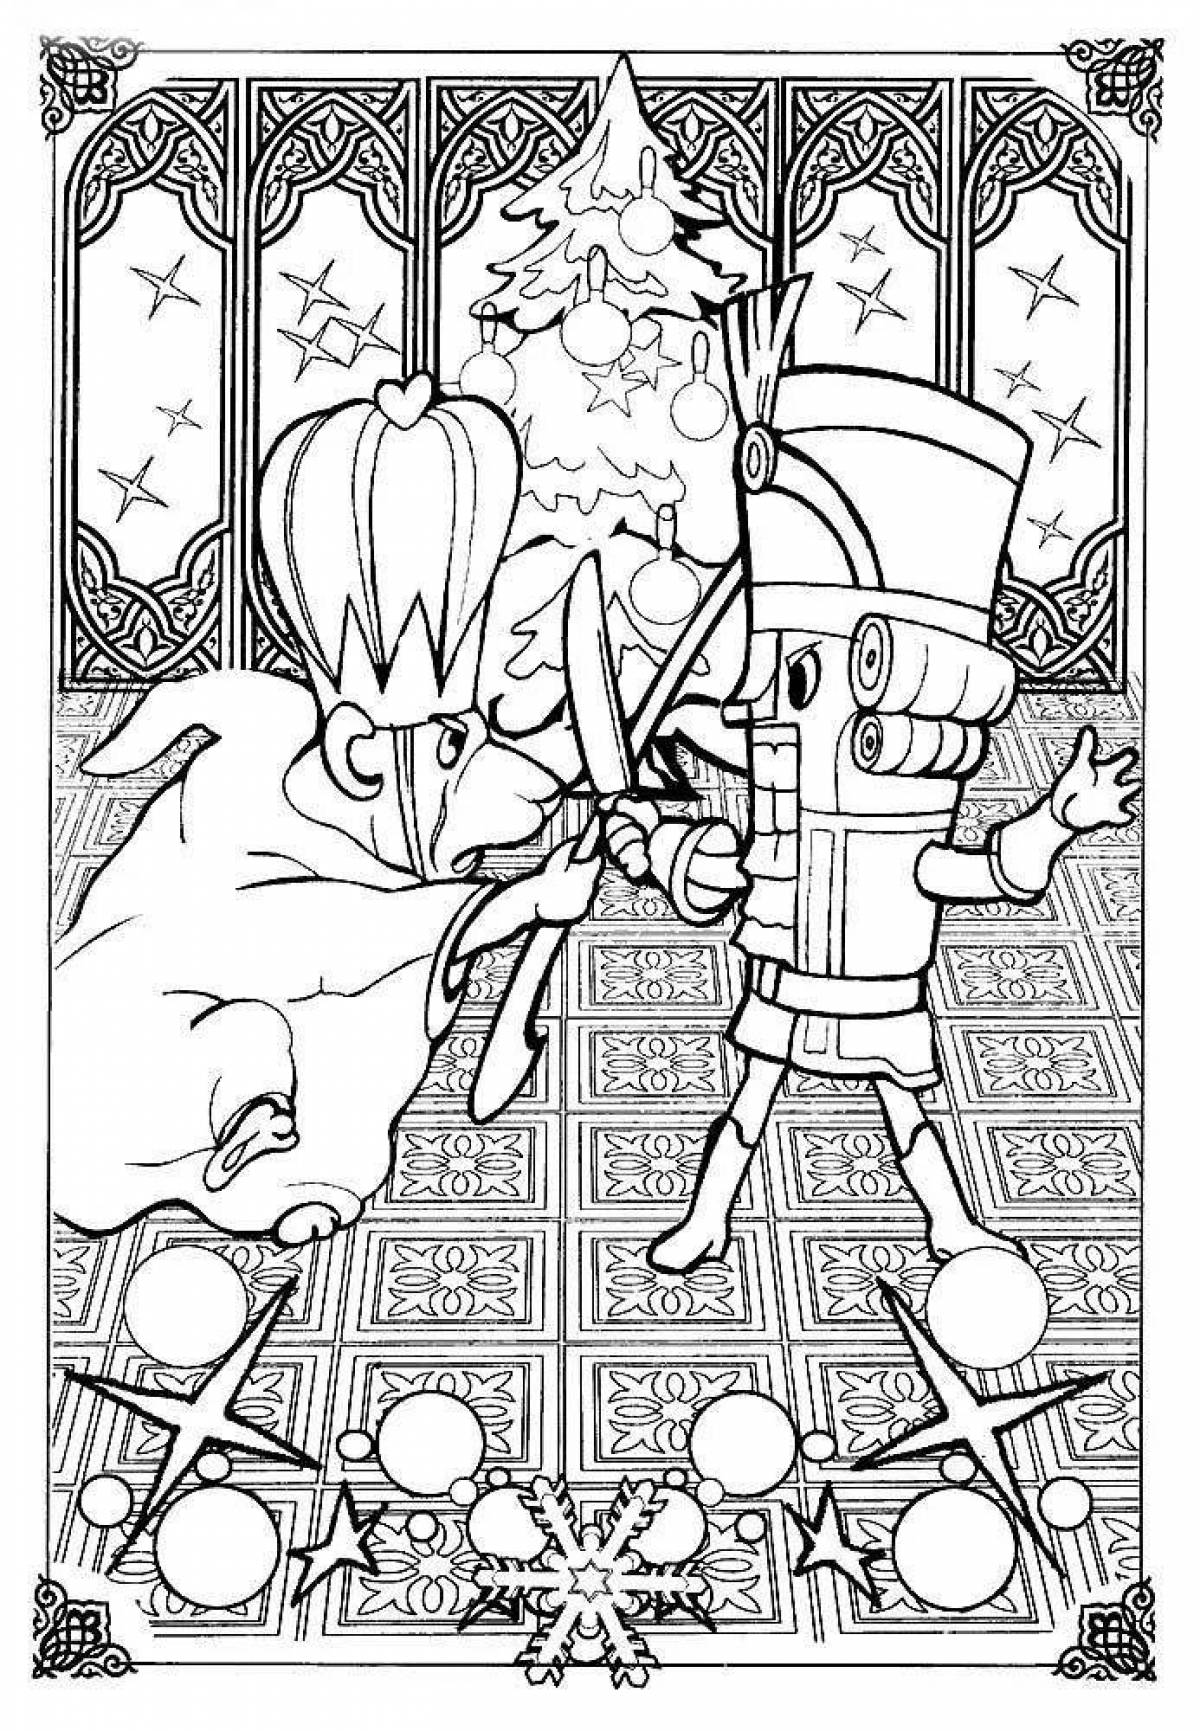 The Nutcracker and the Mouse King #2